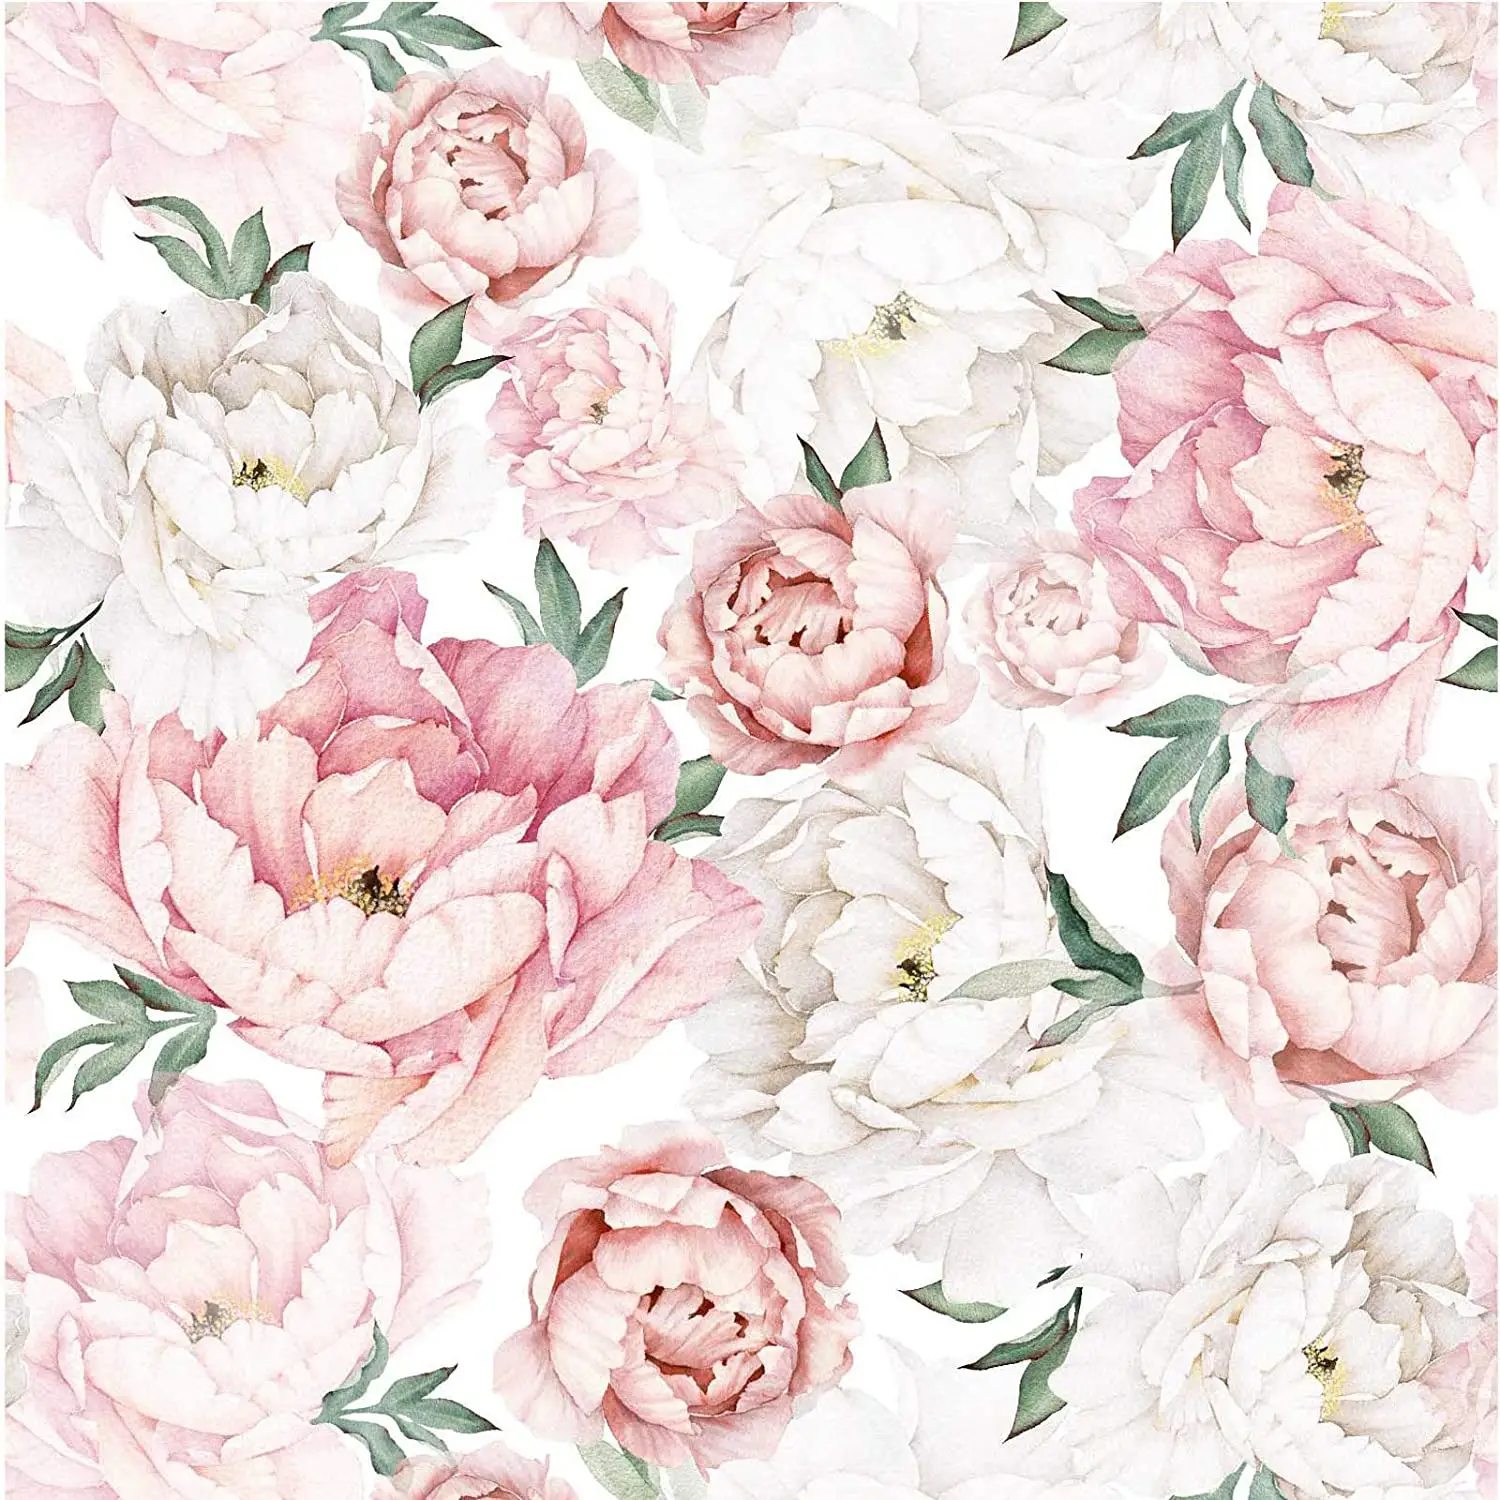 Floral Wallpaper/Wall Coating Peel and Stick Self Adhesive Removable Watercolor Floral Vinyl Flower Contact Paper for Home